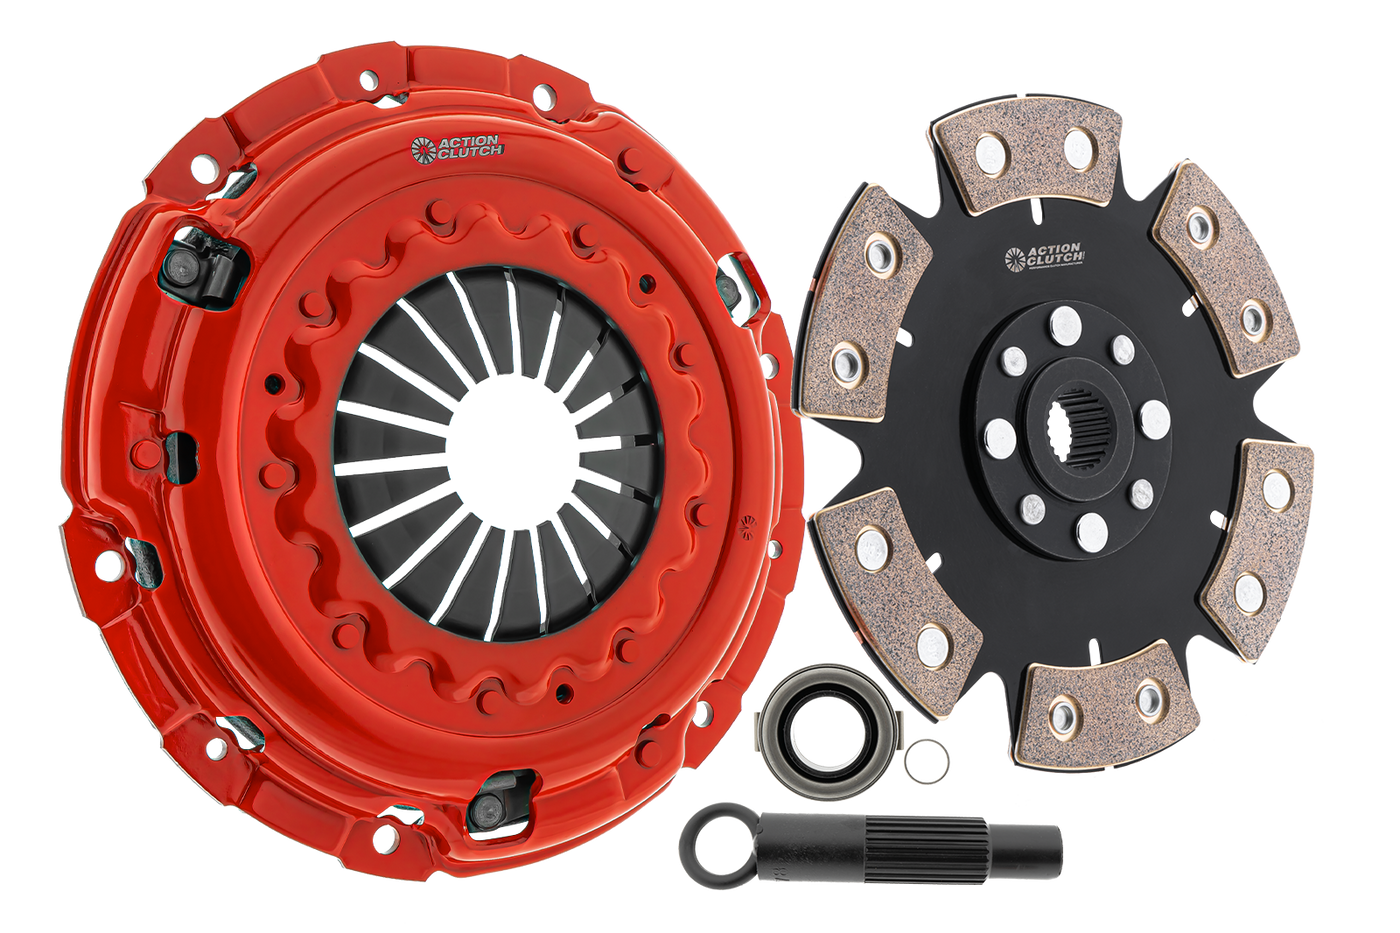 Stage 6 Clutch Kit (2MD) for Acura EL 2001-2005 1.7L SOHC (D17)